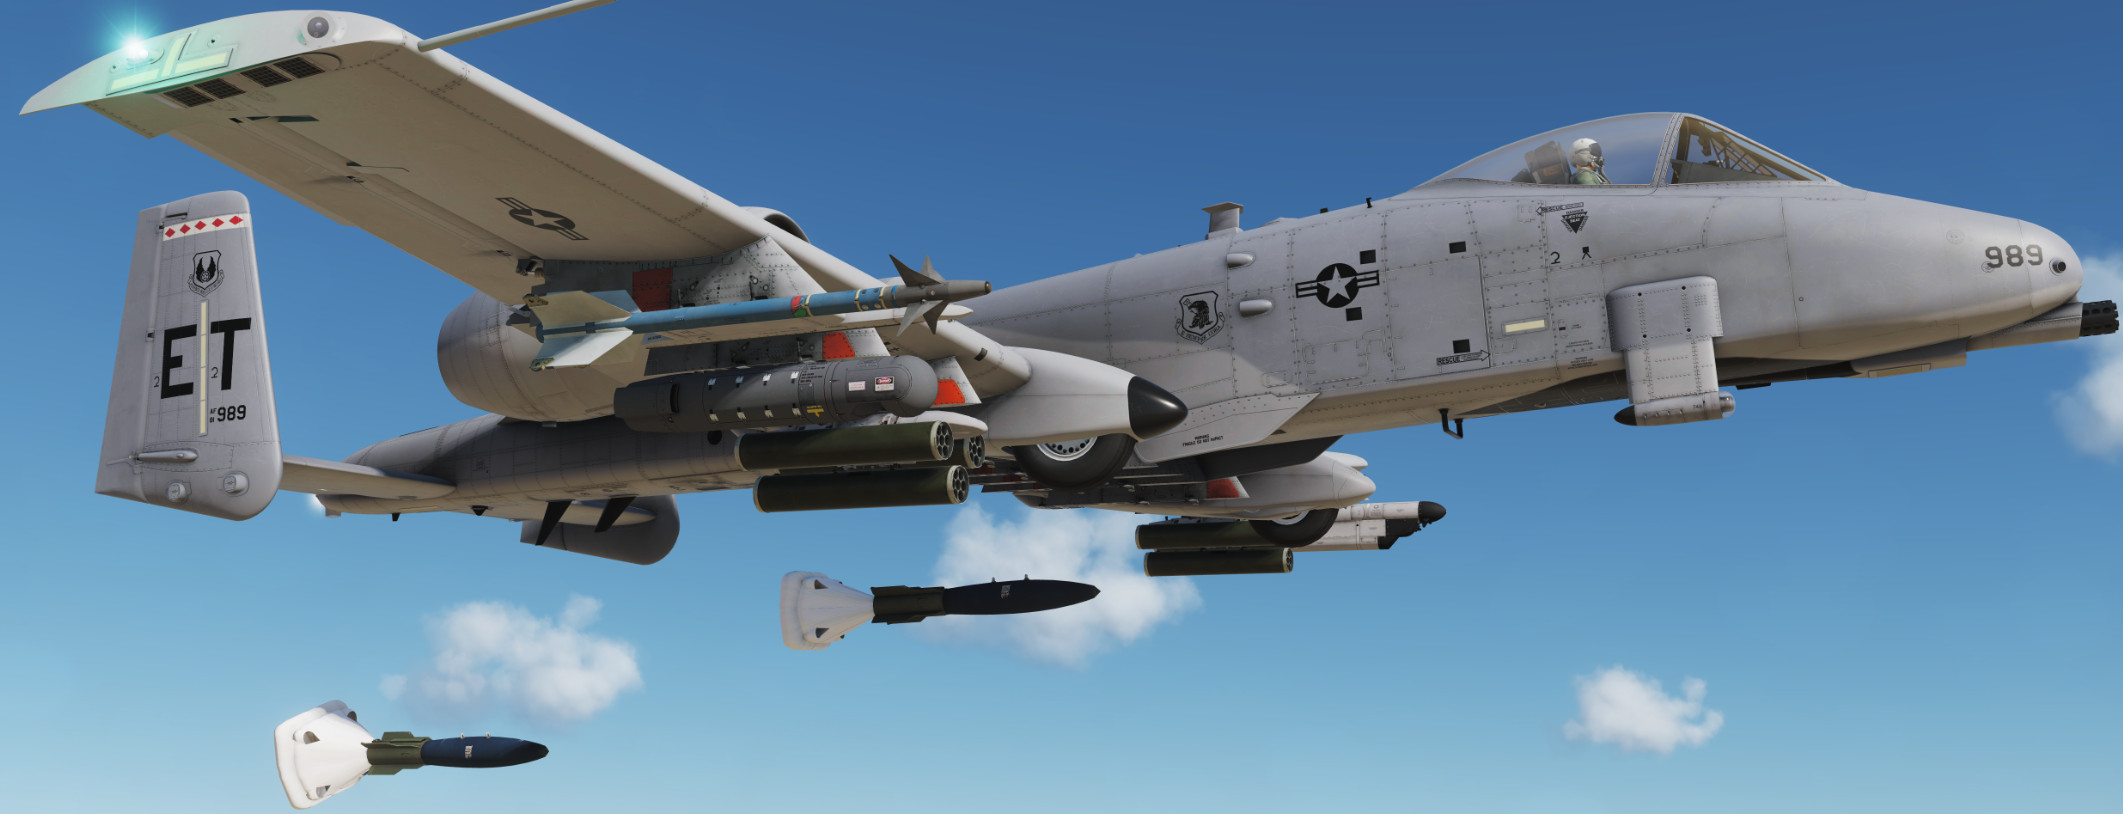 A-10C. Alcohol based fuel testbed, Eglin AFB 2012.